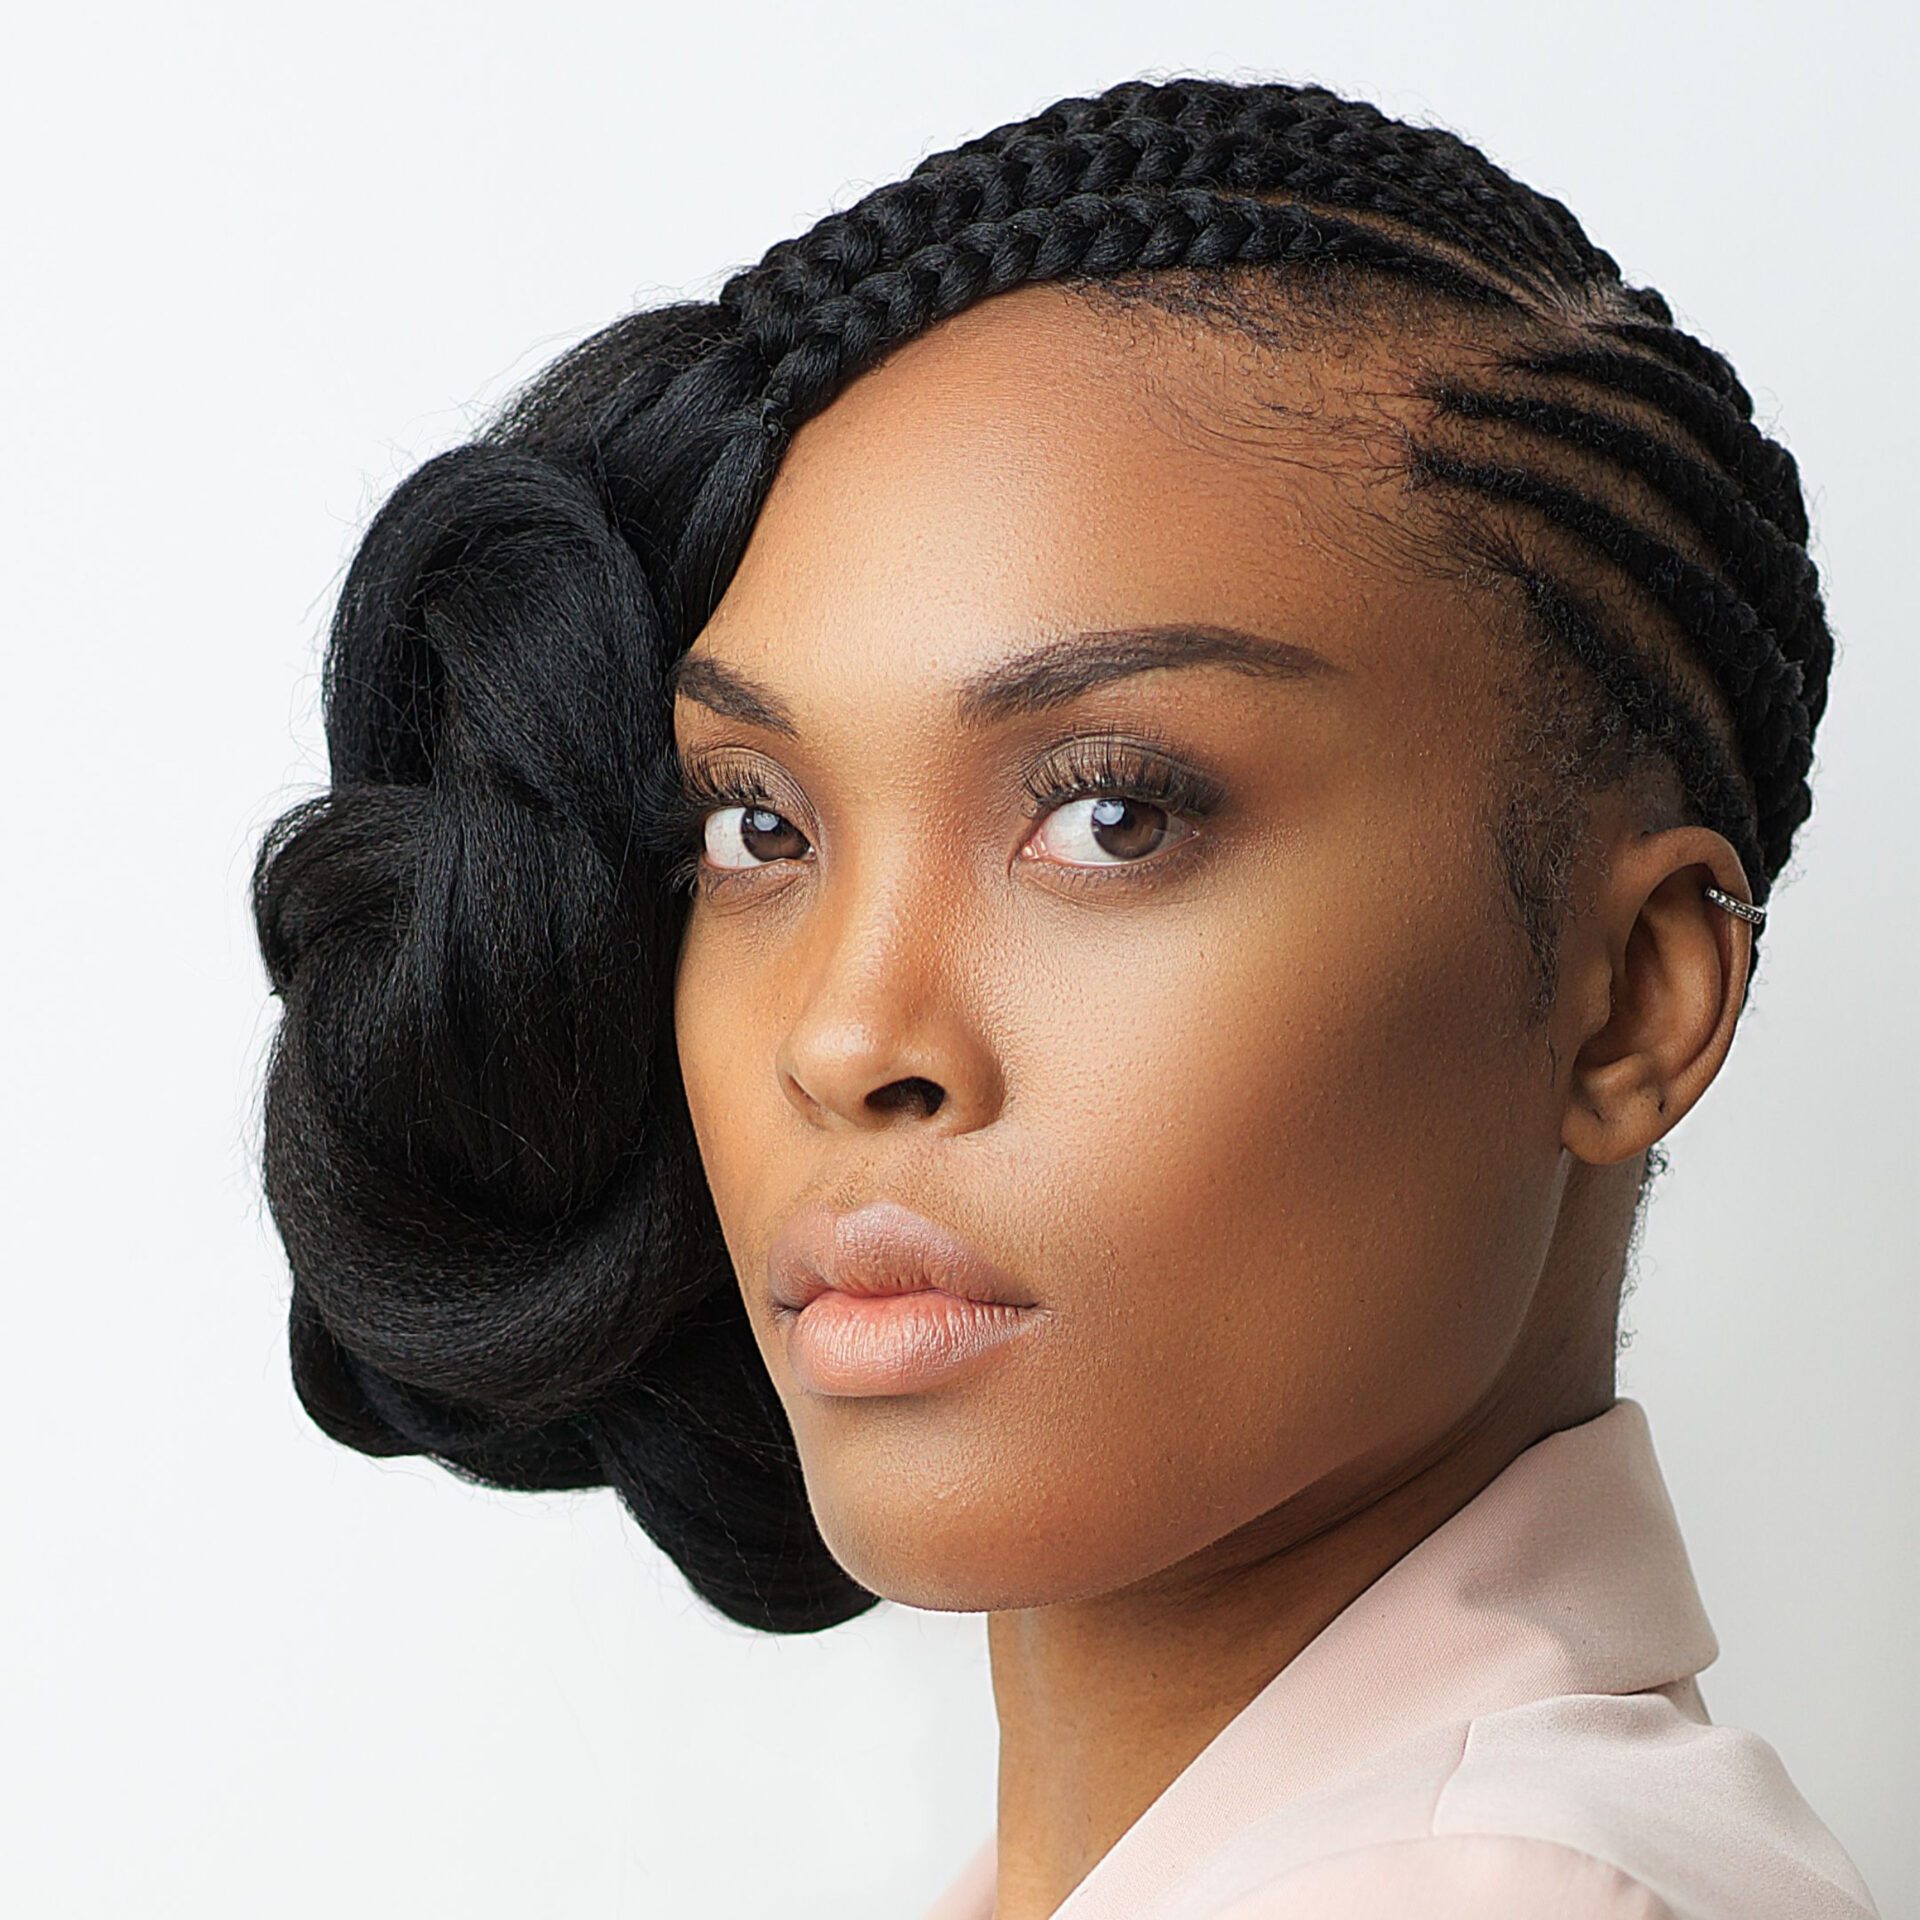 THE TOP HAIR SALON FOR WOMEN WITH AFRO, NATURAL OR MULTI-TEXTURED HAIR IN EDMONTON, LONDON